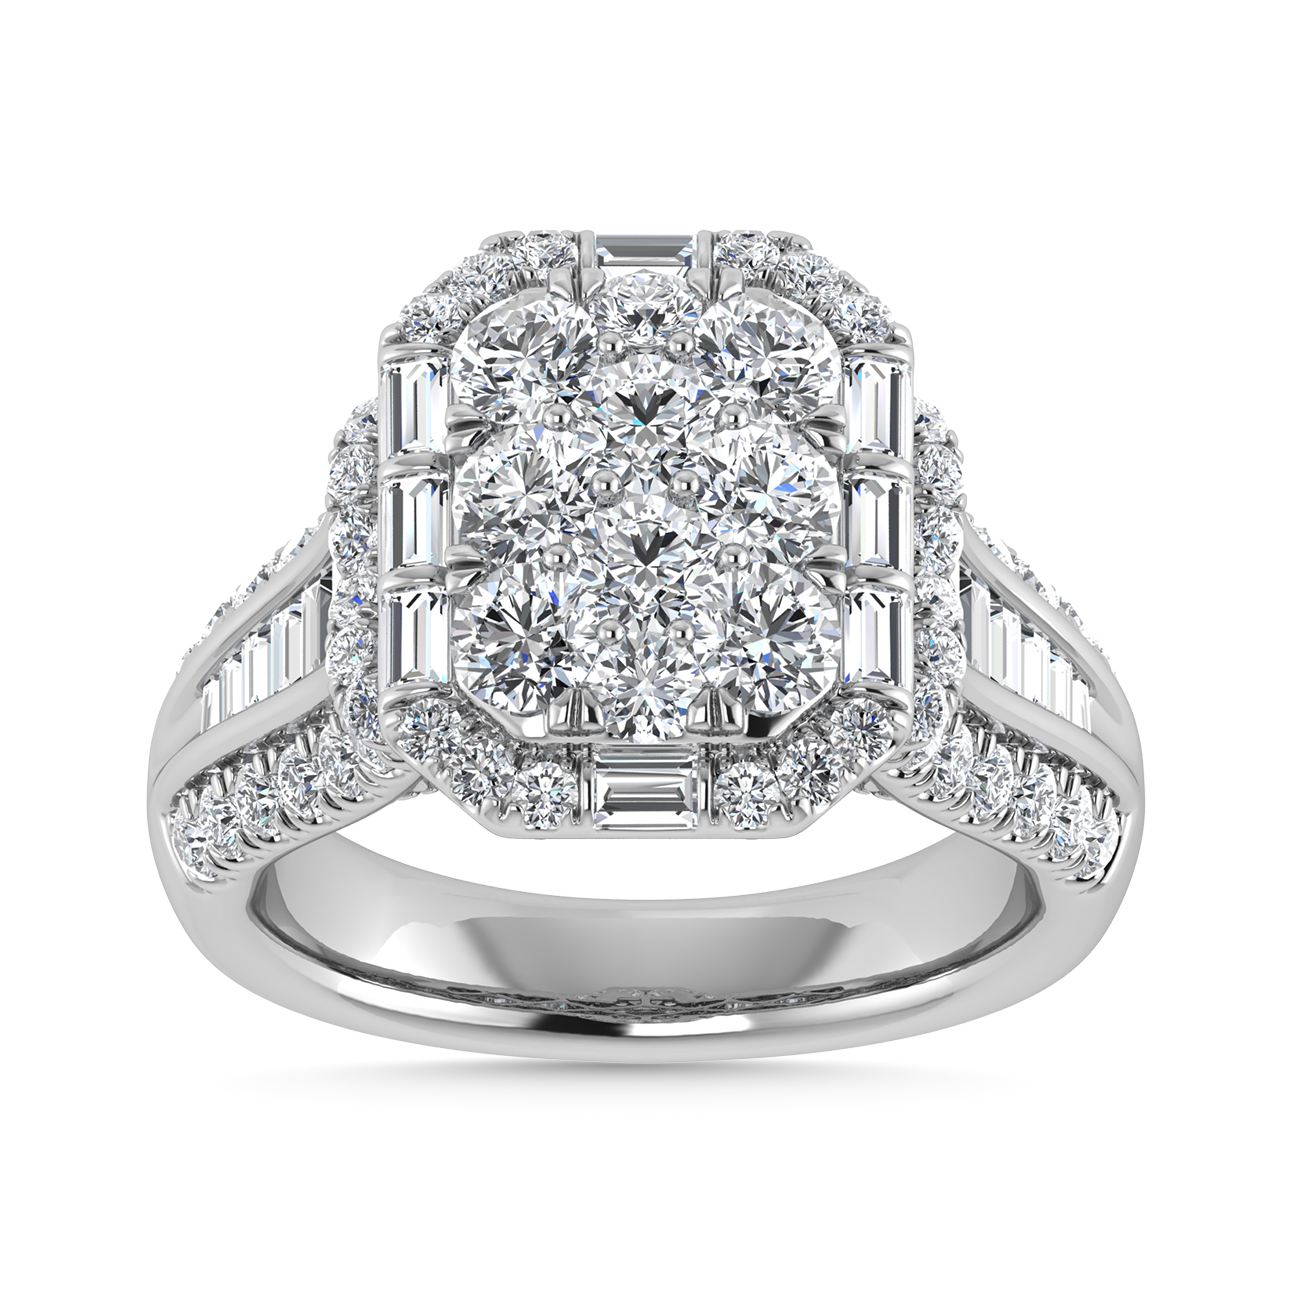 Engagement Rings Archives - Unclaimed Diamonds